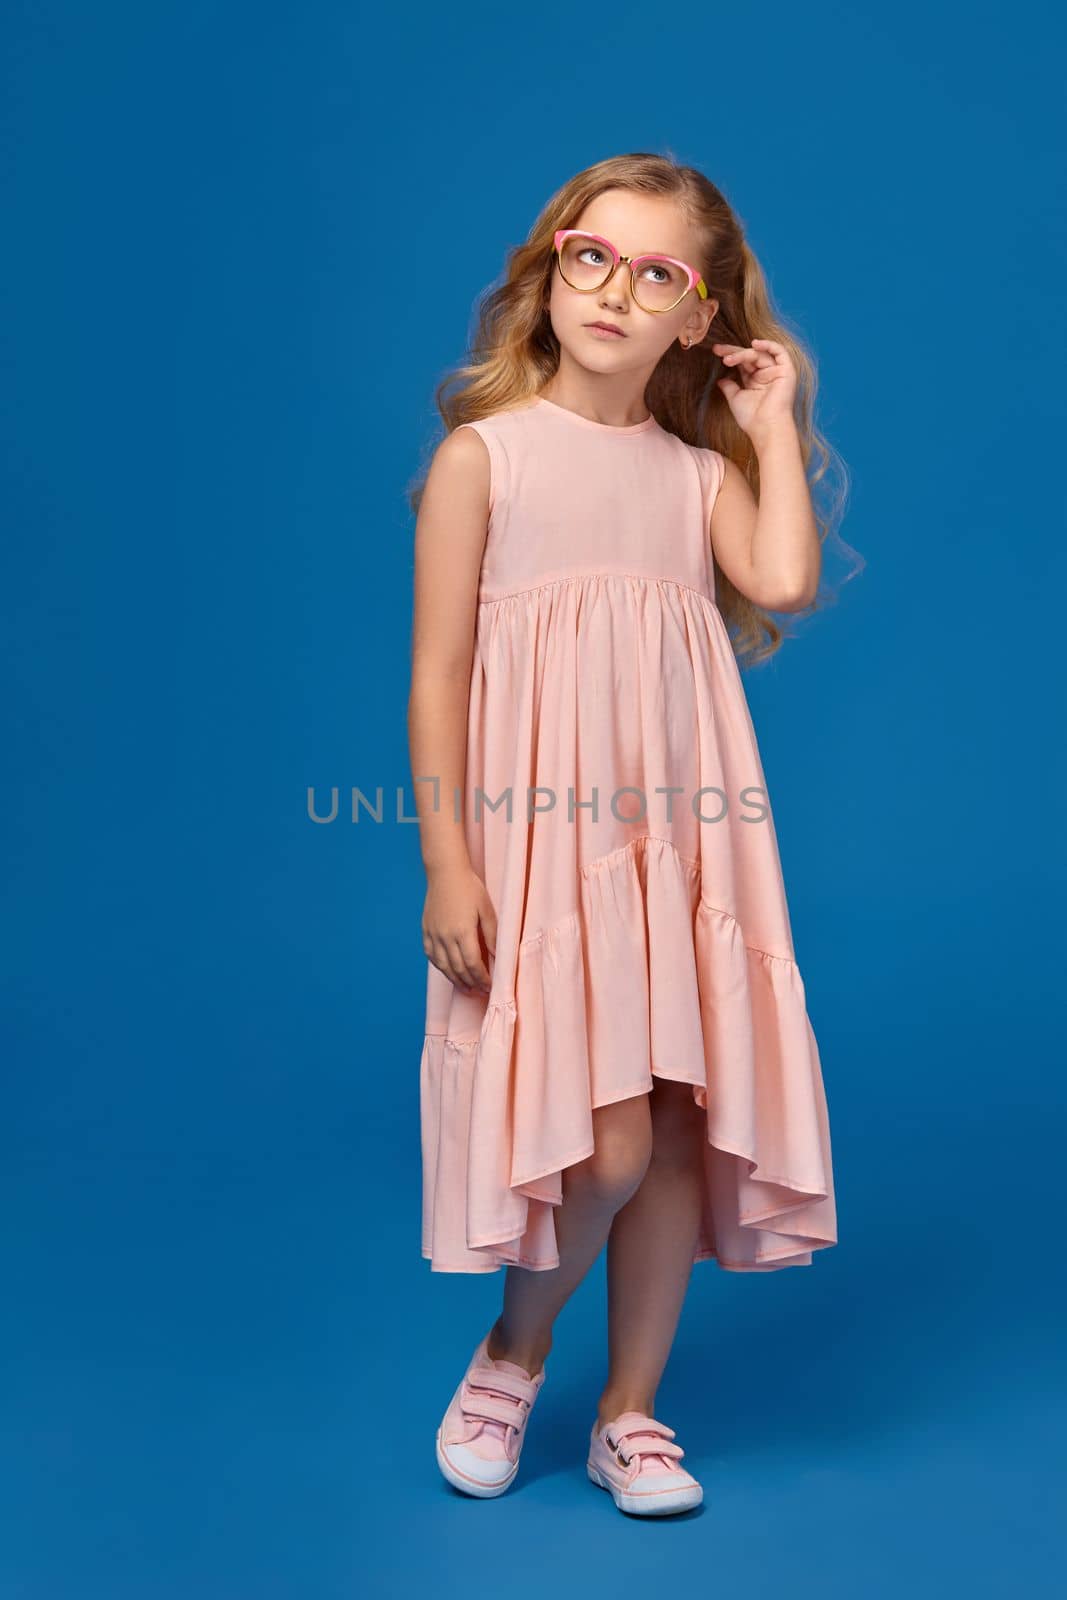 Modern little girl in a pink dress and a fashionable glasses is looking up, standing on a blue background.